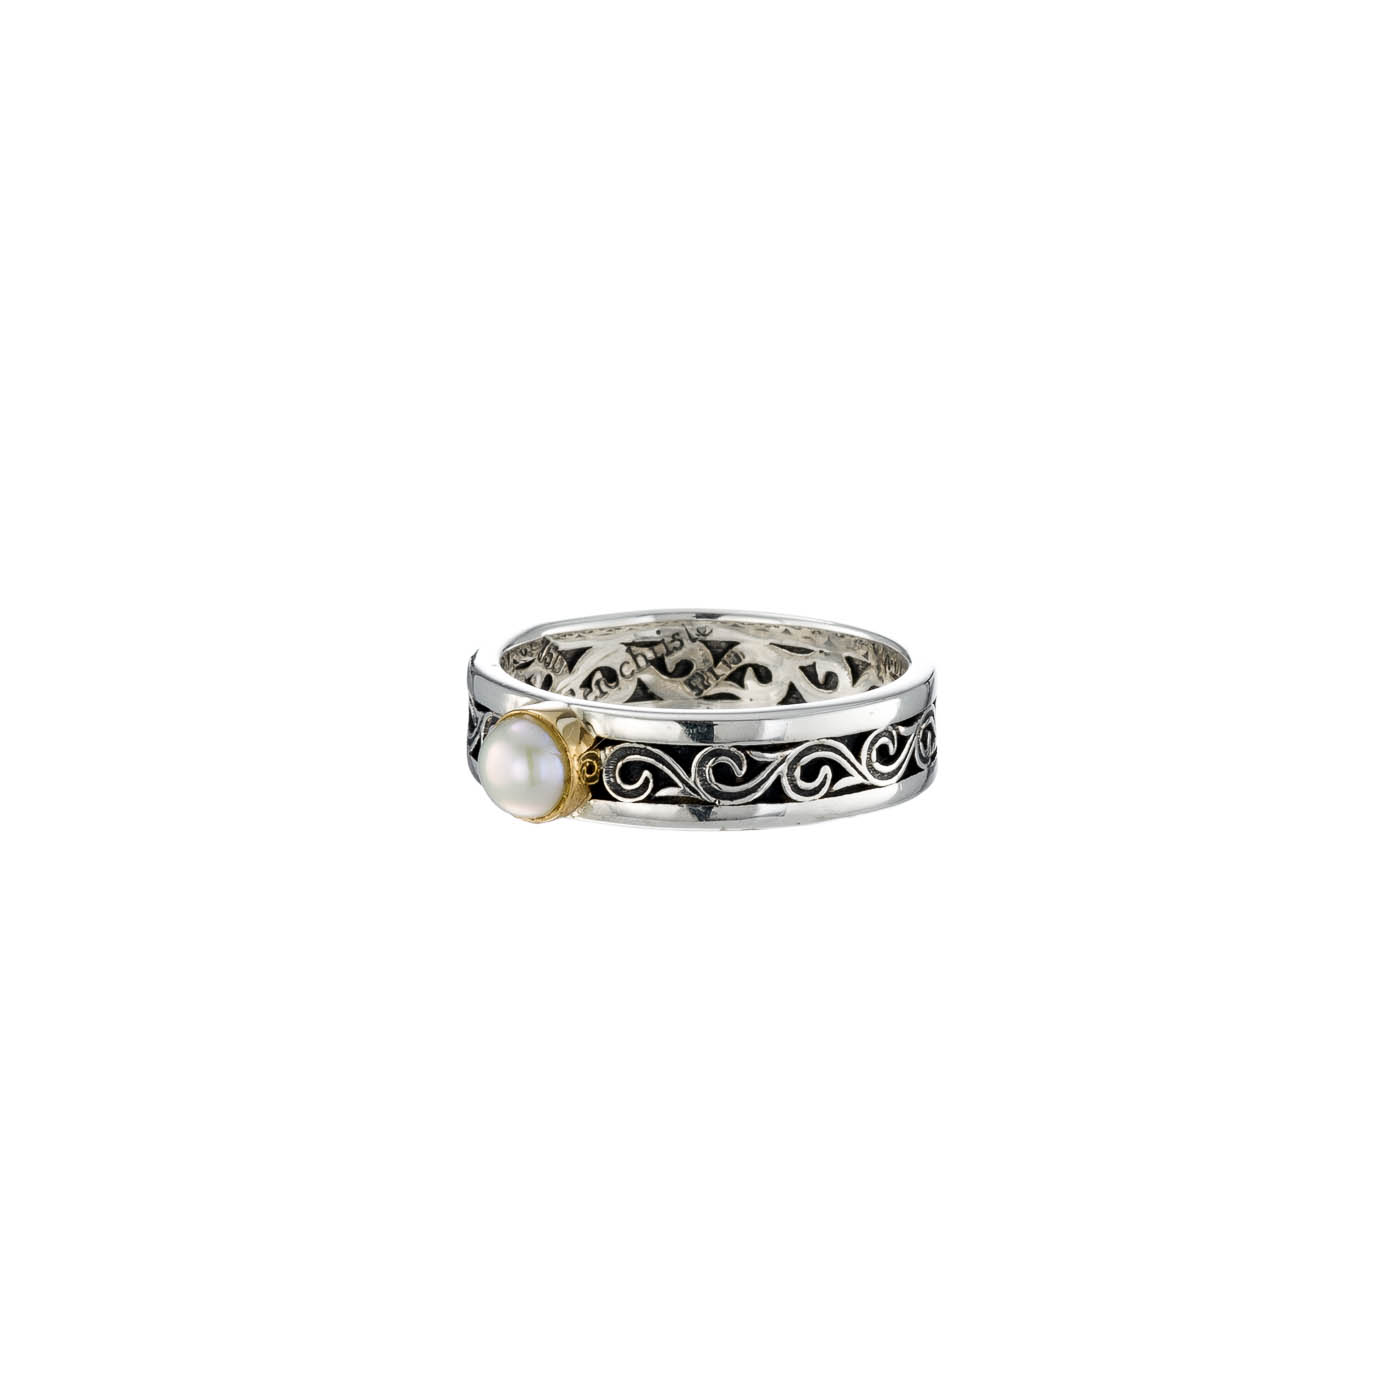 Kyma band ring in Sterling Silver and 18K Gold with pearl